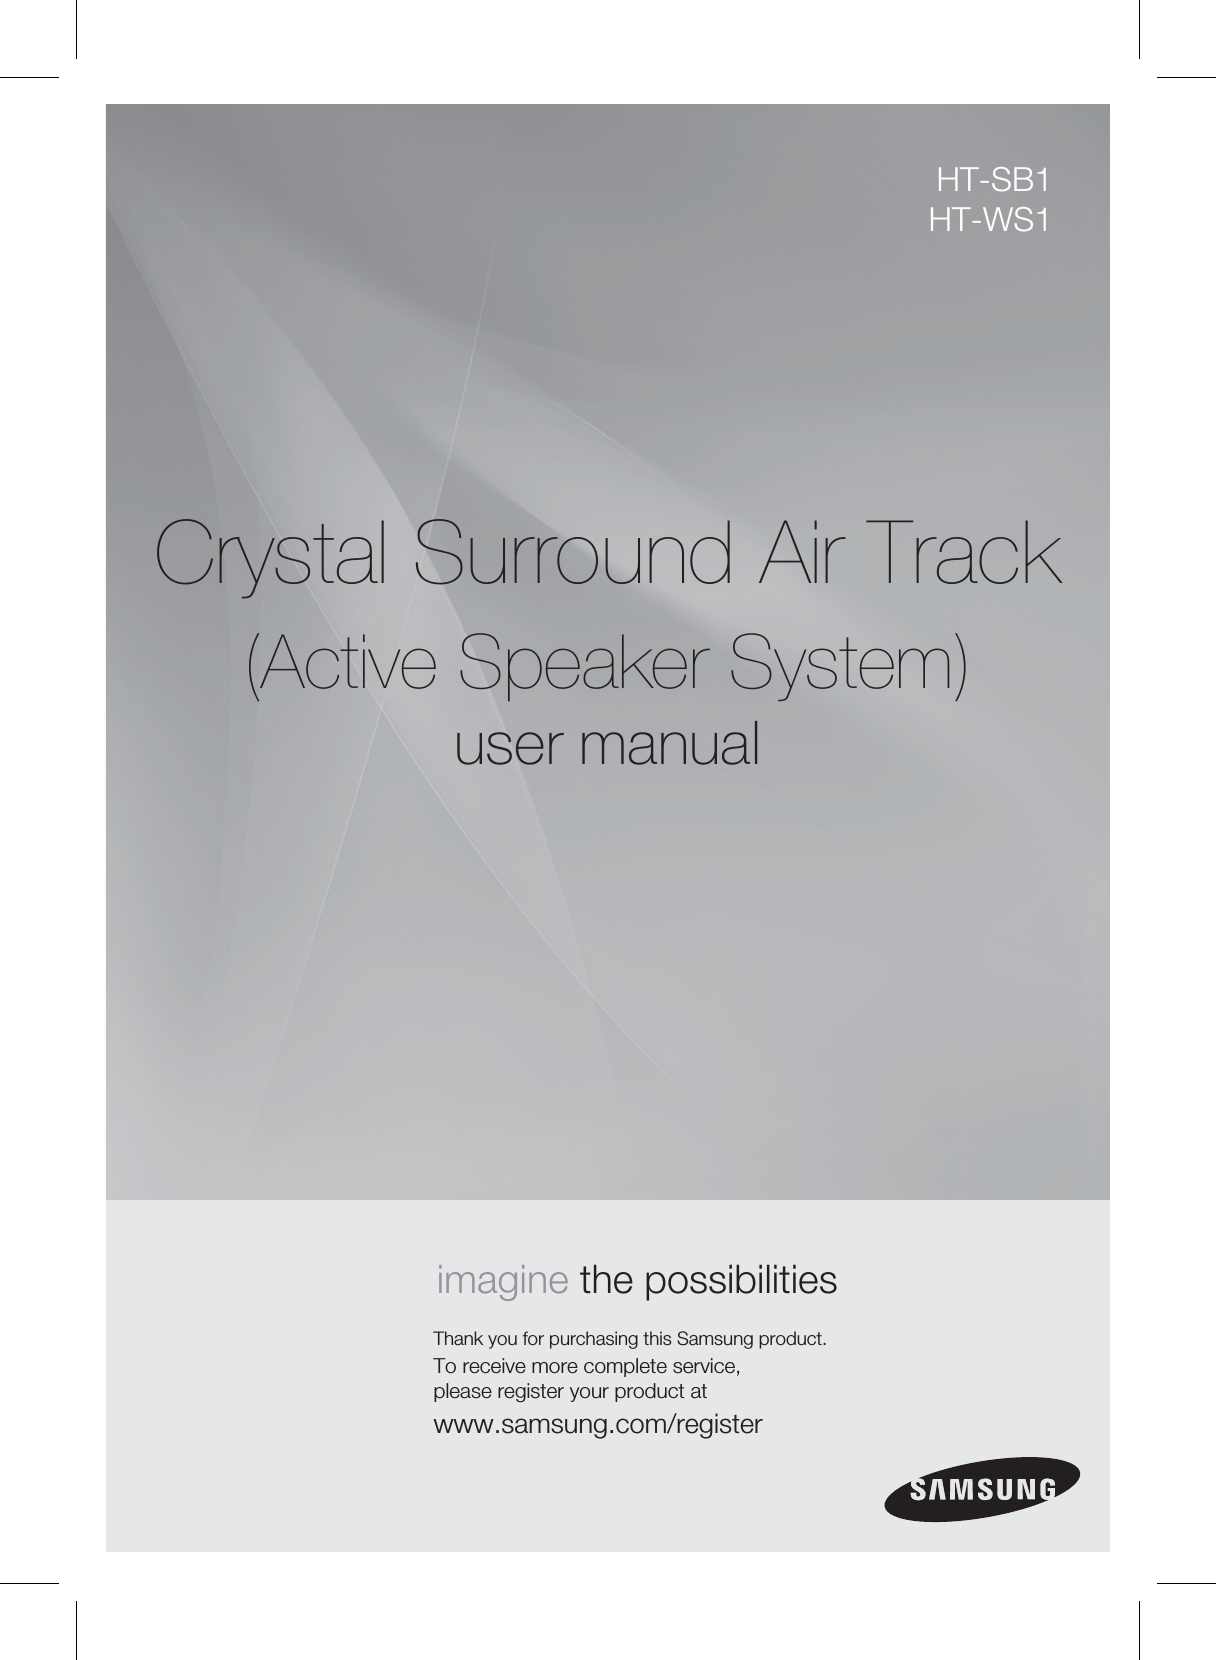 Crystal Surround Air Track (Active Speaker System)user manualimagine the possibilitiesThank you for purchasing this Samsung product.To receive more complete service,please register your product atwww.samsung.com/registerHT-SB1HT-WS1